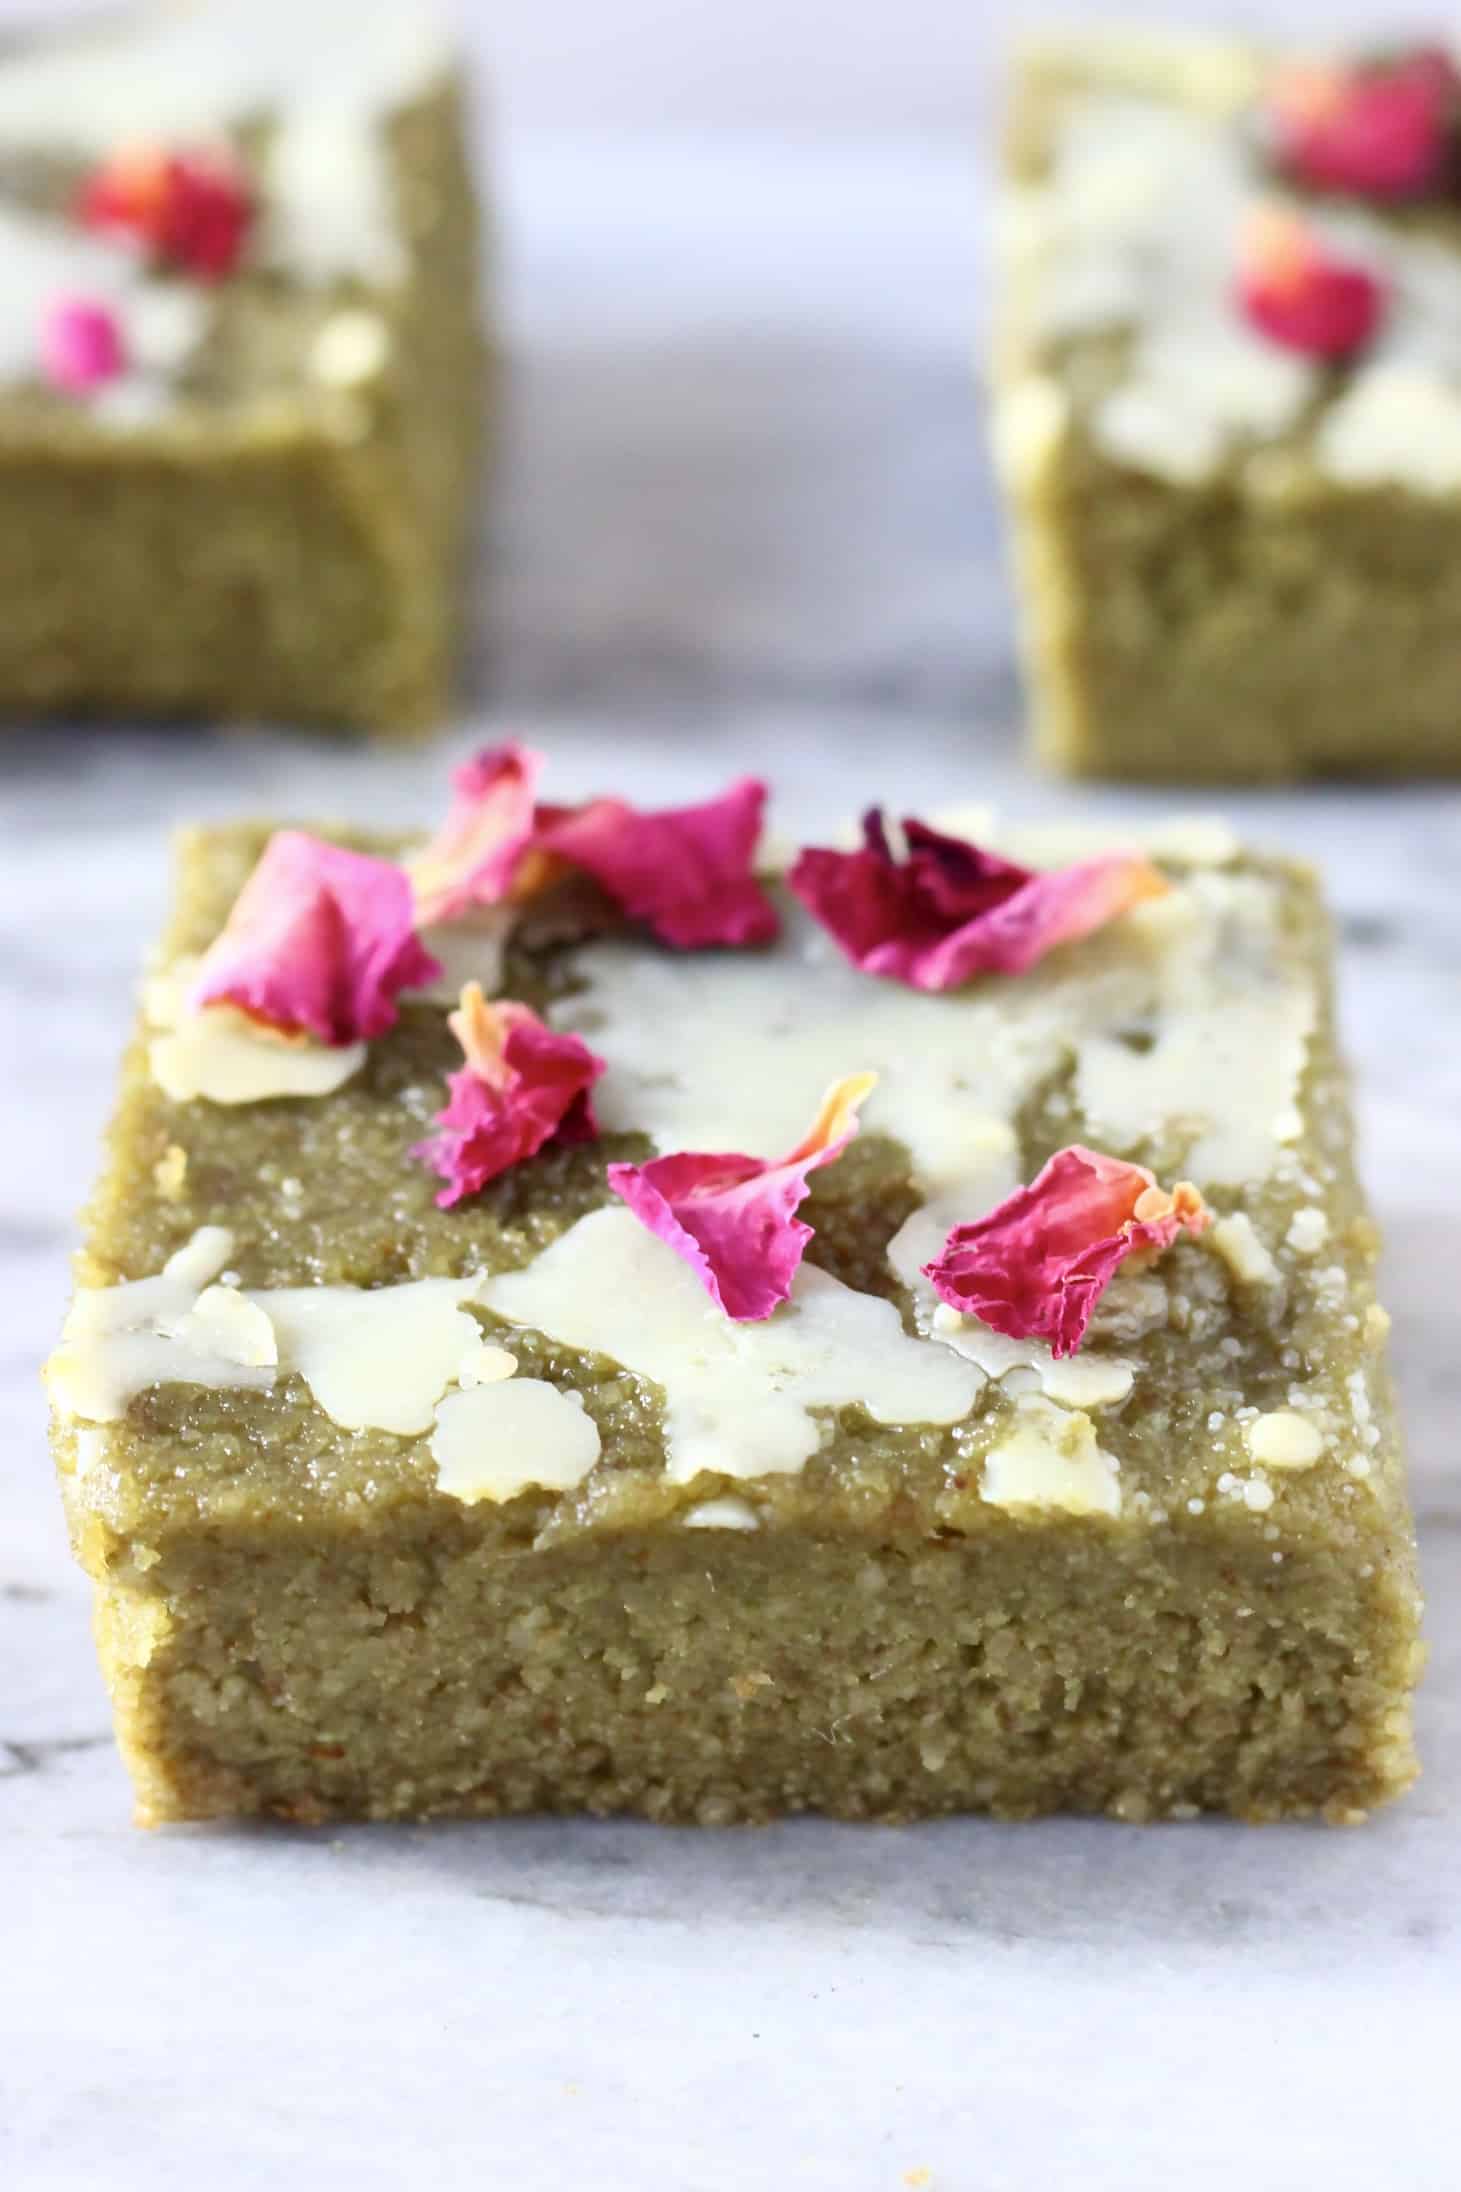 Three gluten-free vegan matcha brownies drizzled with white chocolate and decorated with rose petals